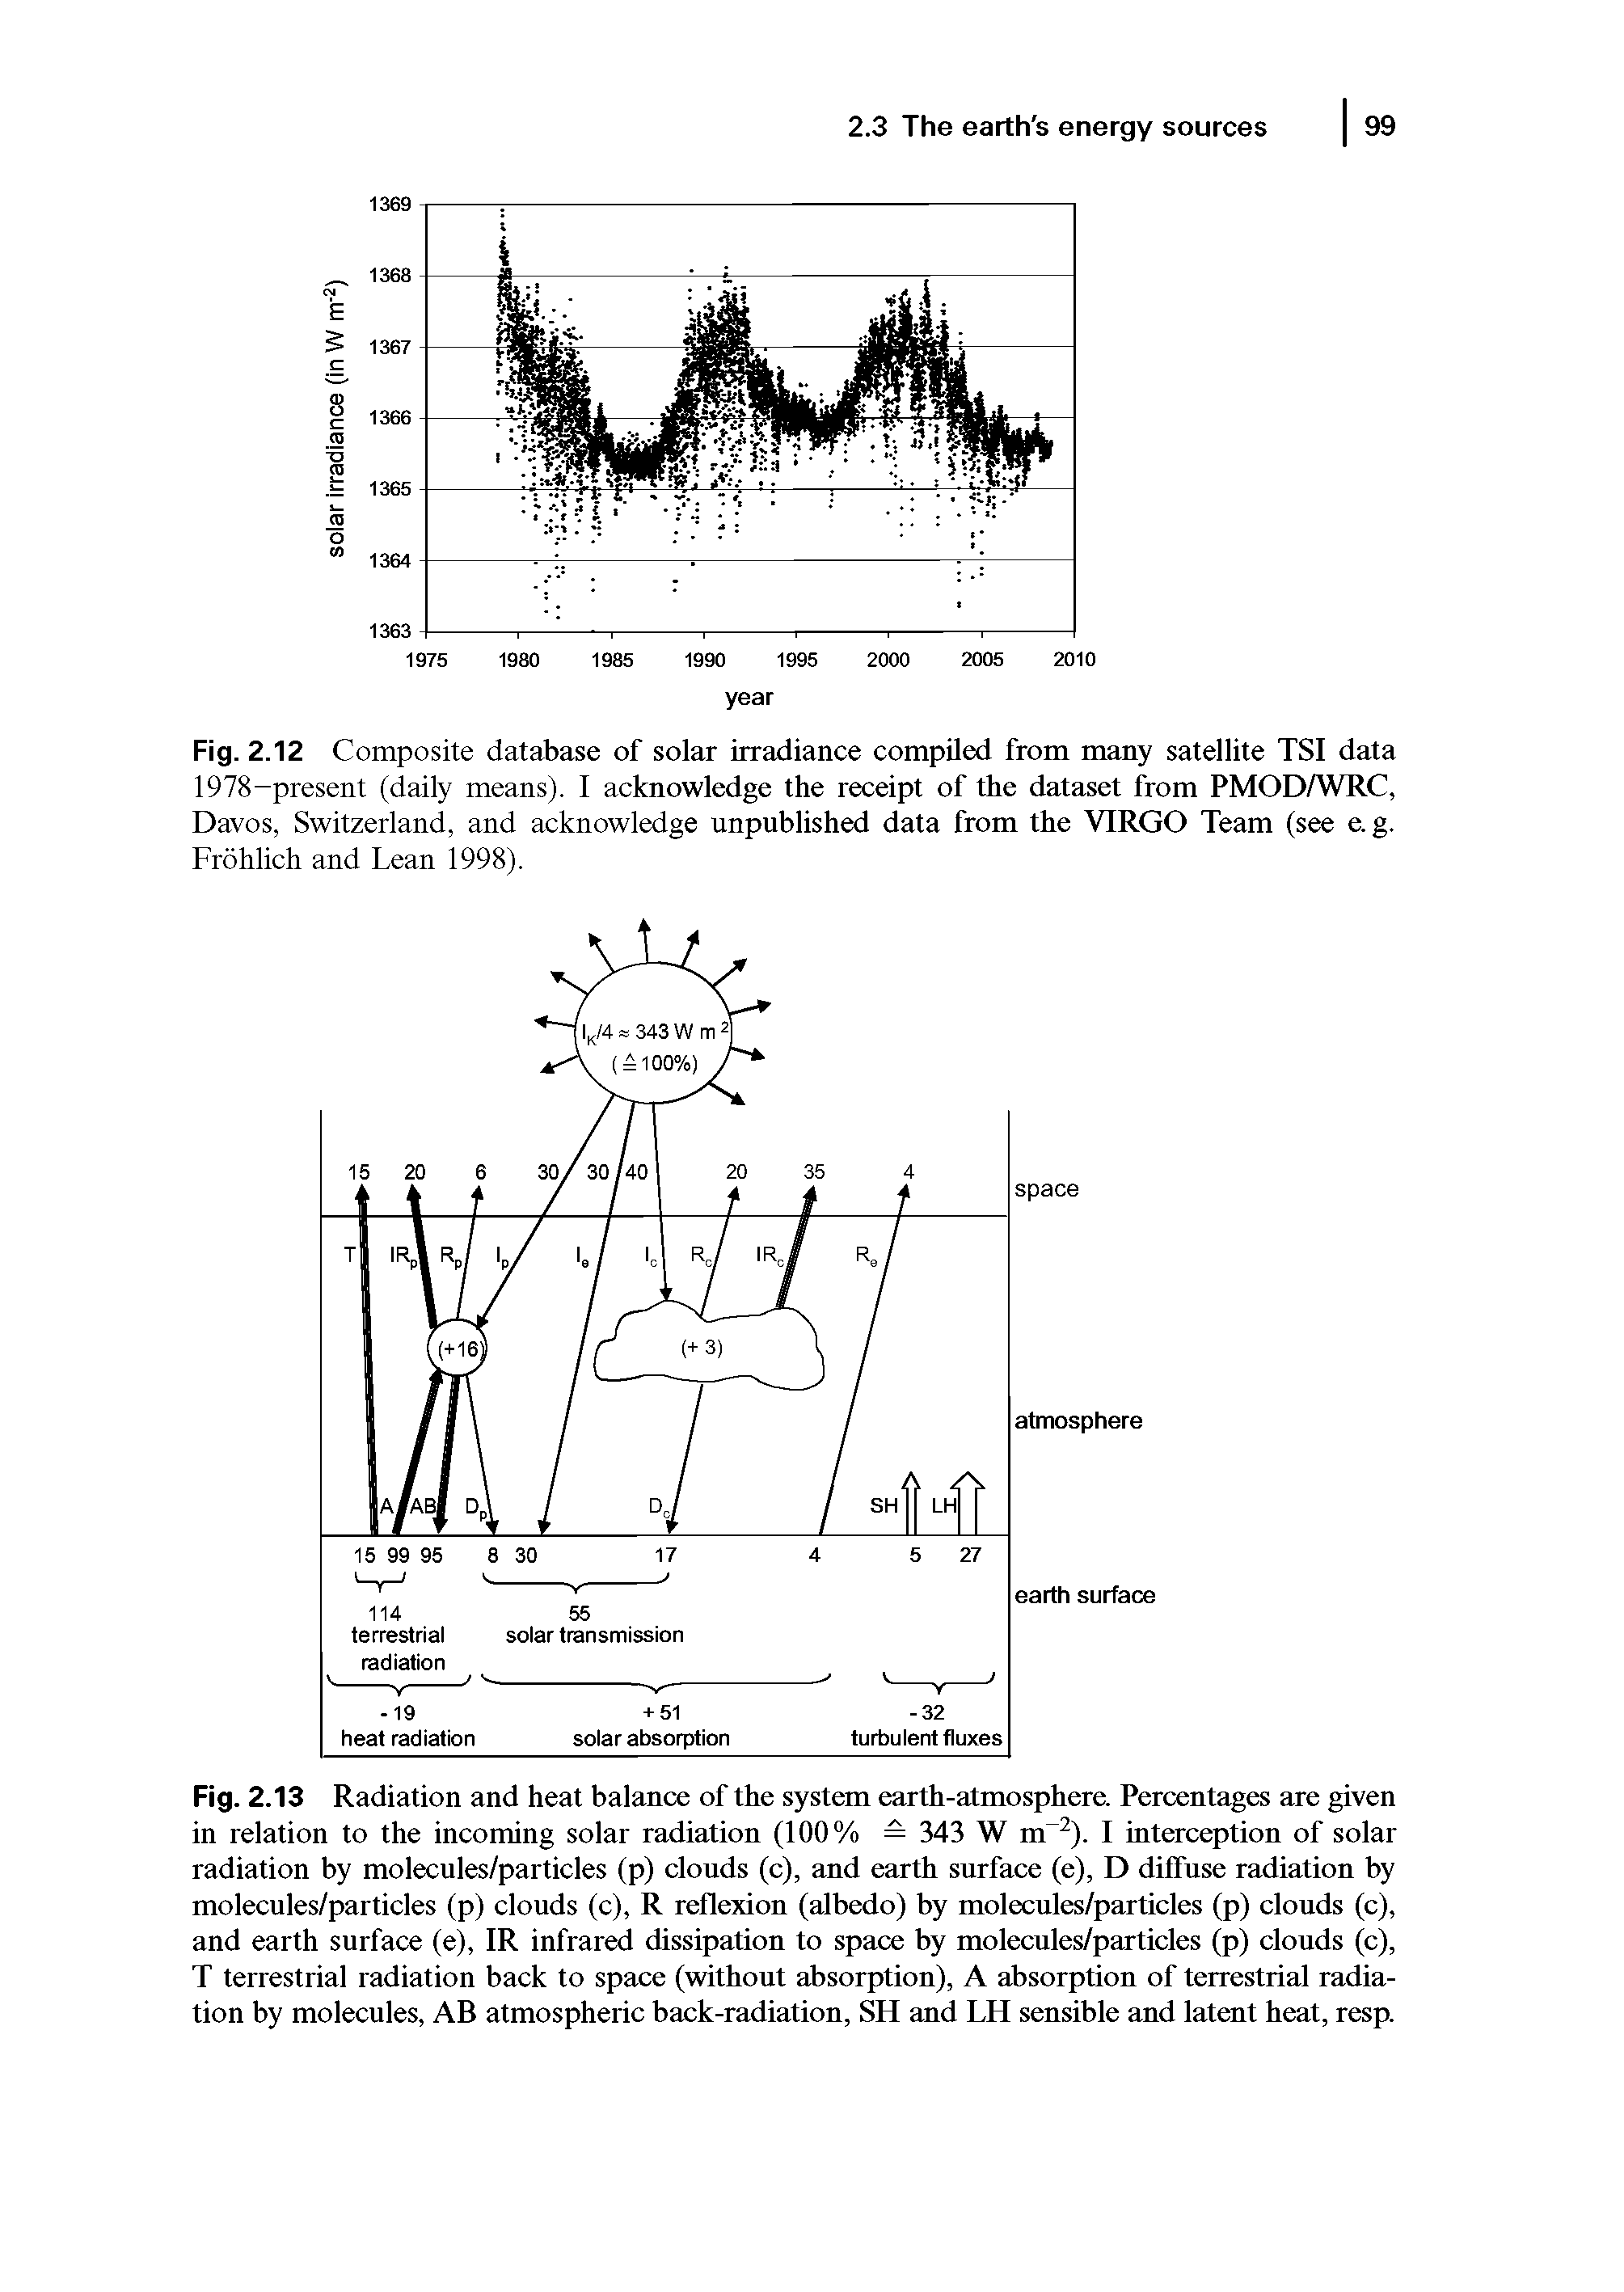 Fig. 2.13 Radiation and heat balance of the system earth-atmosphere. Percentages are given in relation to the incoming solar radiation (100% = 343 W m ). I interception of solar radiation by molecules/particles (p) clouds (c), and earth surface (e), D diffuse radiation by molecules/particles (p) clouds (c), R reflexion (albedo) by molecules/particles (p) clouds (c), and earth surface (e), IR infrared dissipation to space by molecules/particles (p) clouds (c), T terrestrial radiation back to space (without absorption), A absorption of terrestrial radiation by molecules, AB atmospheric back-radiation, SH and LH sensible and latent heat, resp.